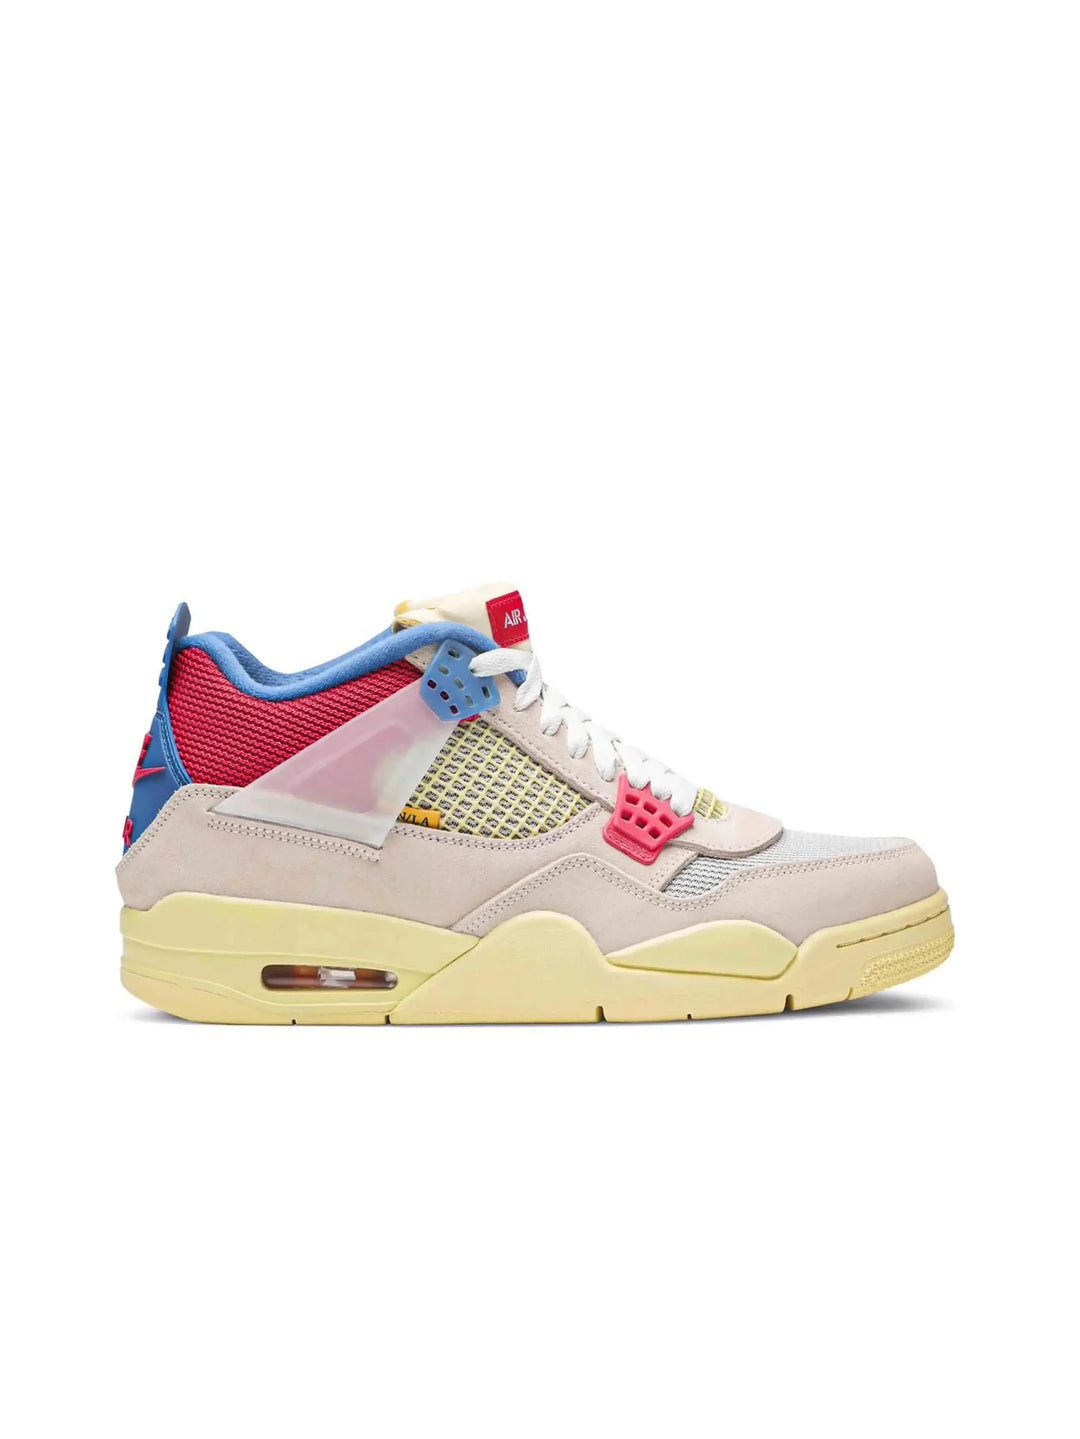 Nike Air Jordan 4 Retro Union Guava Ice in Auckland, New Zealand - Shop name